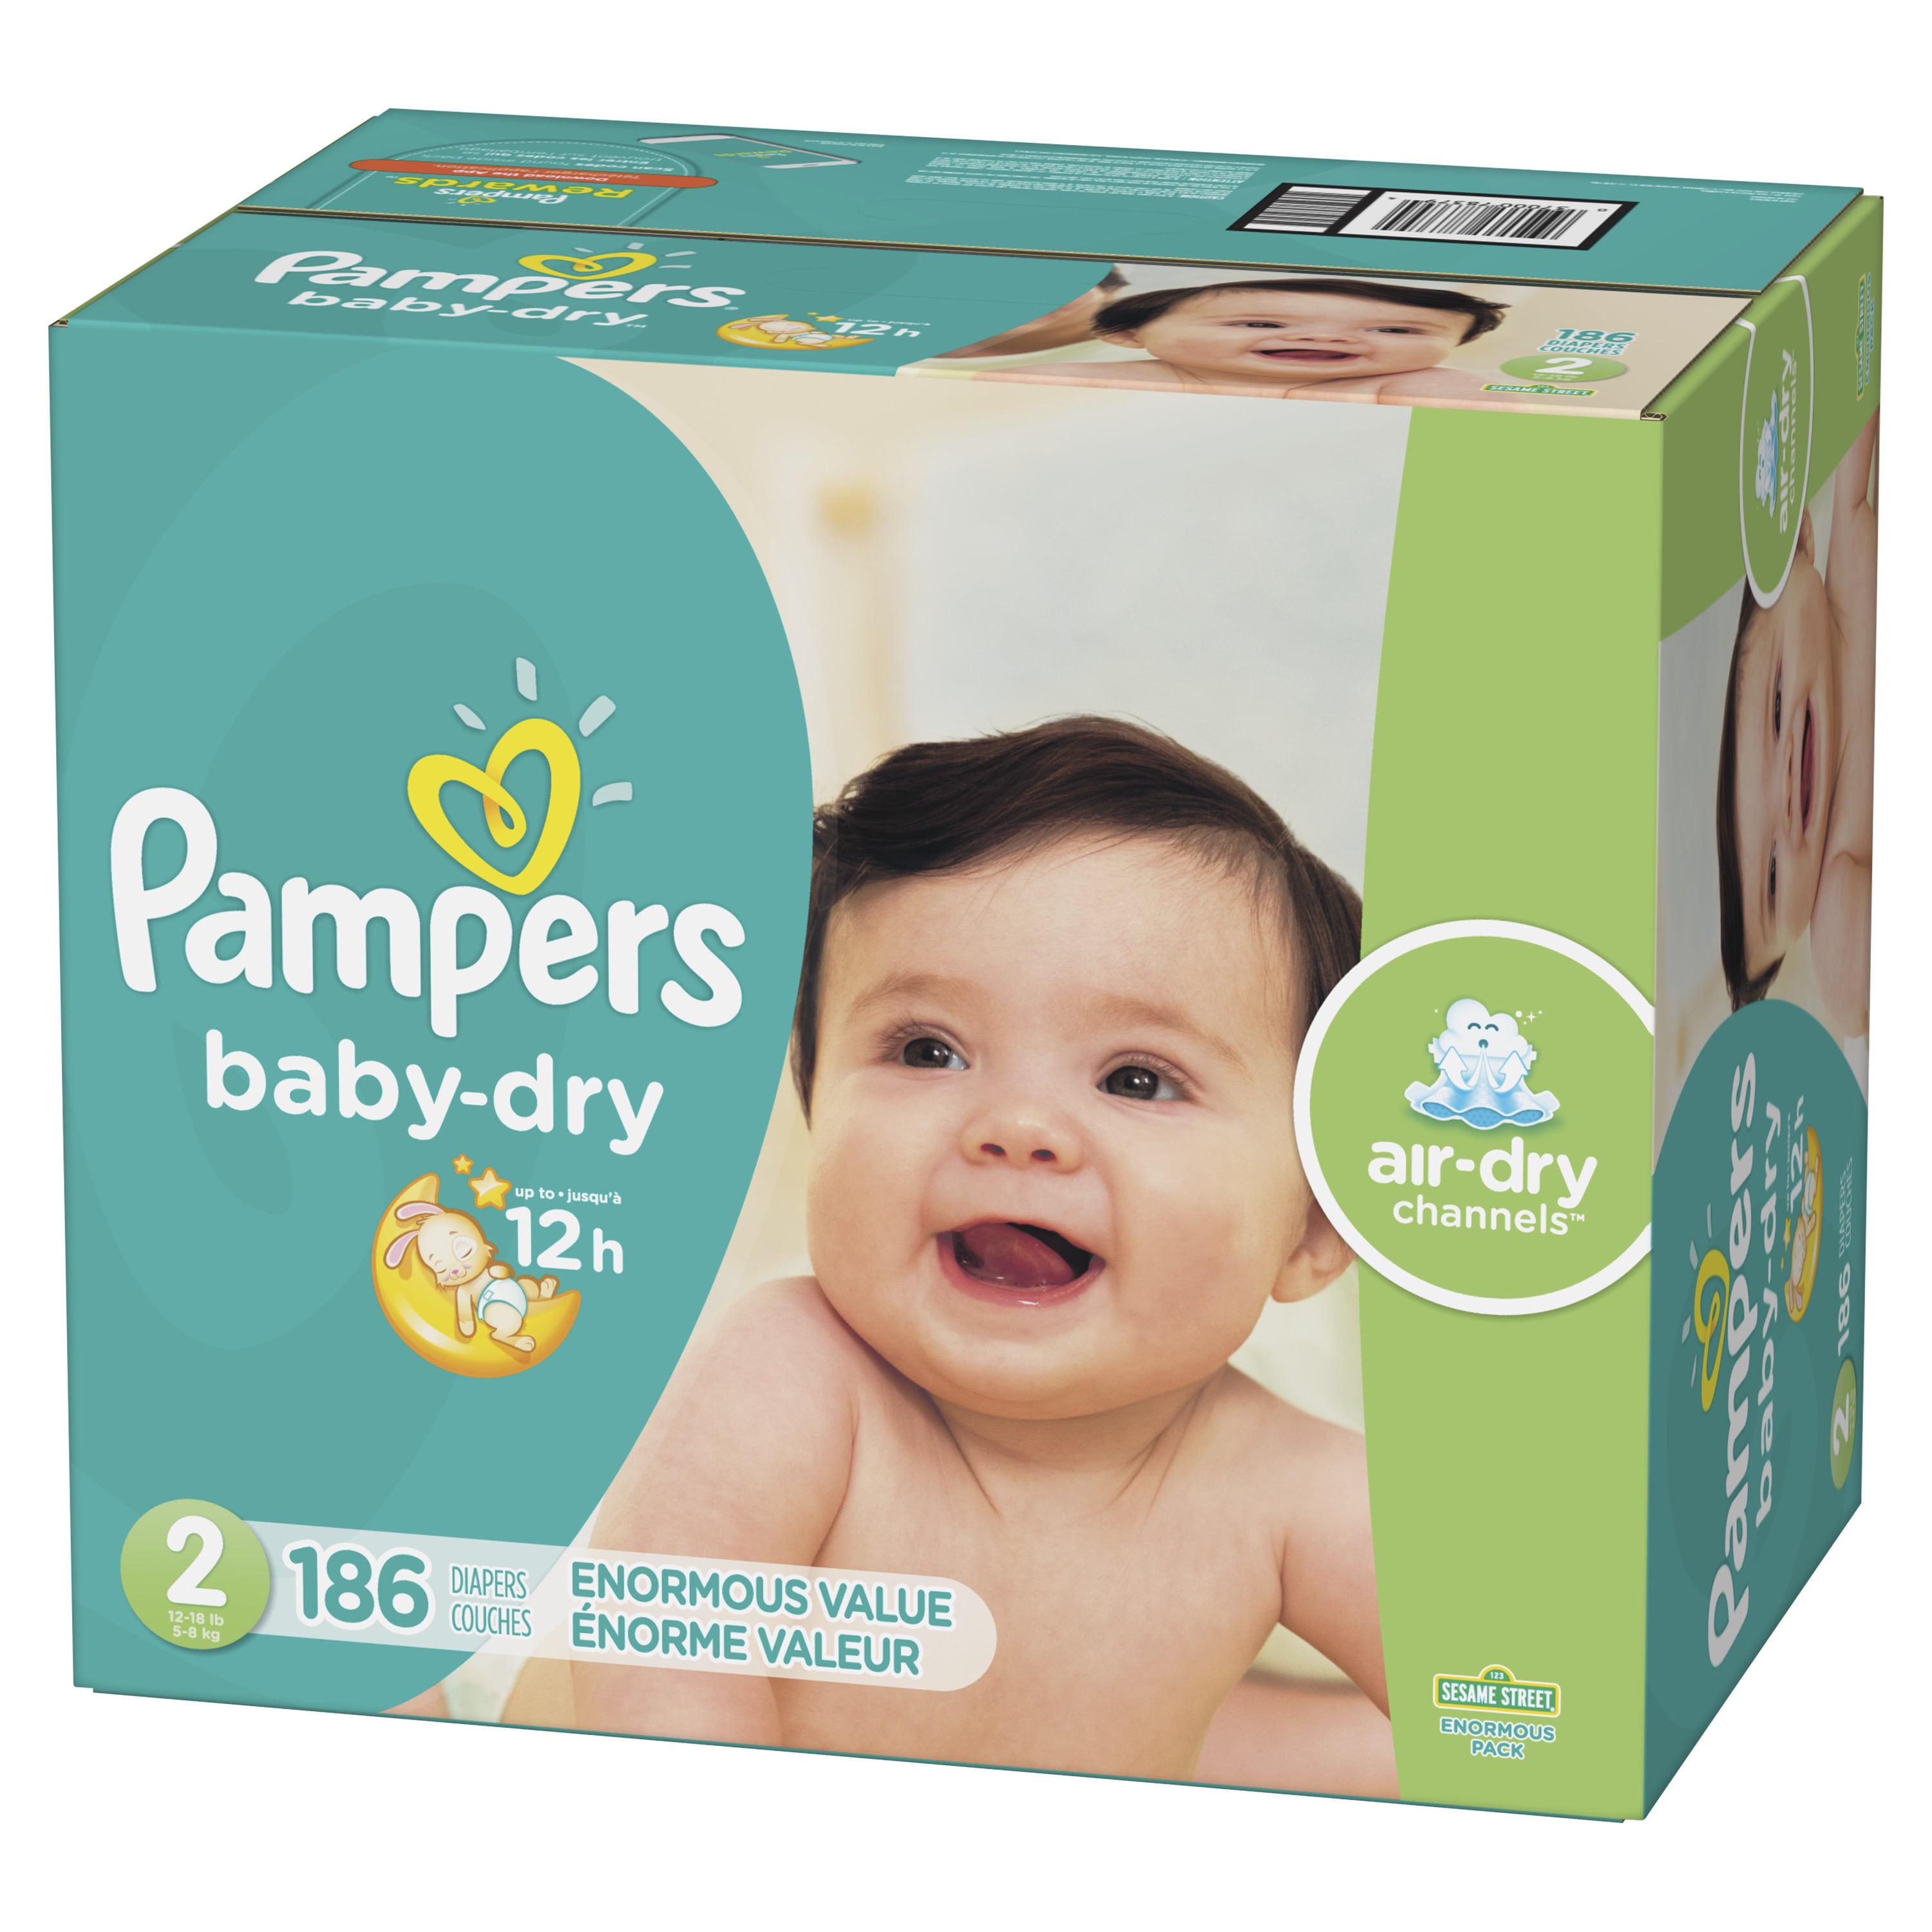 box of diapers cost